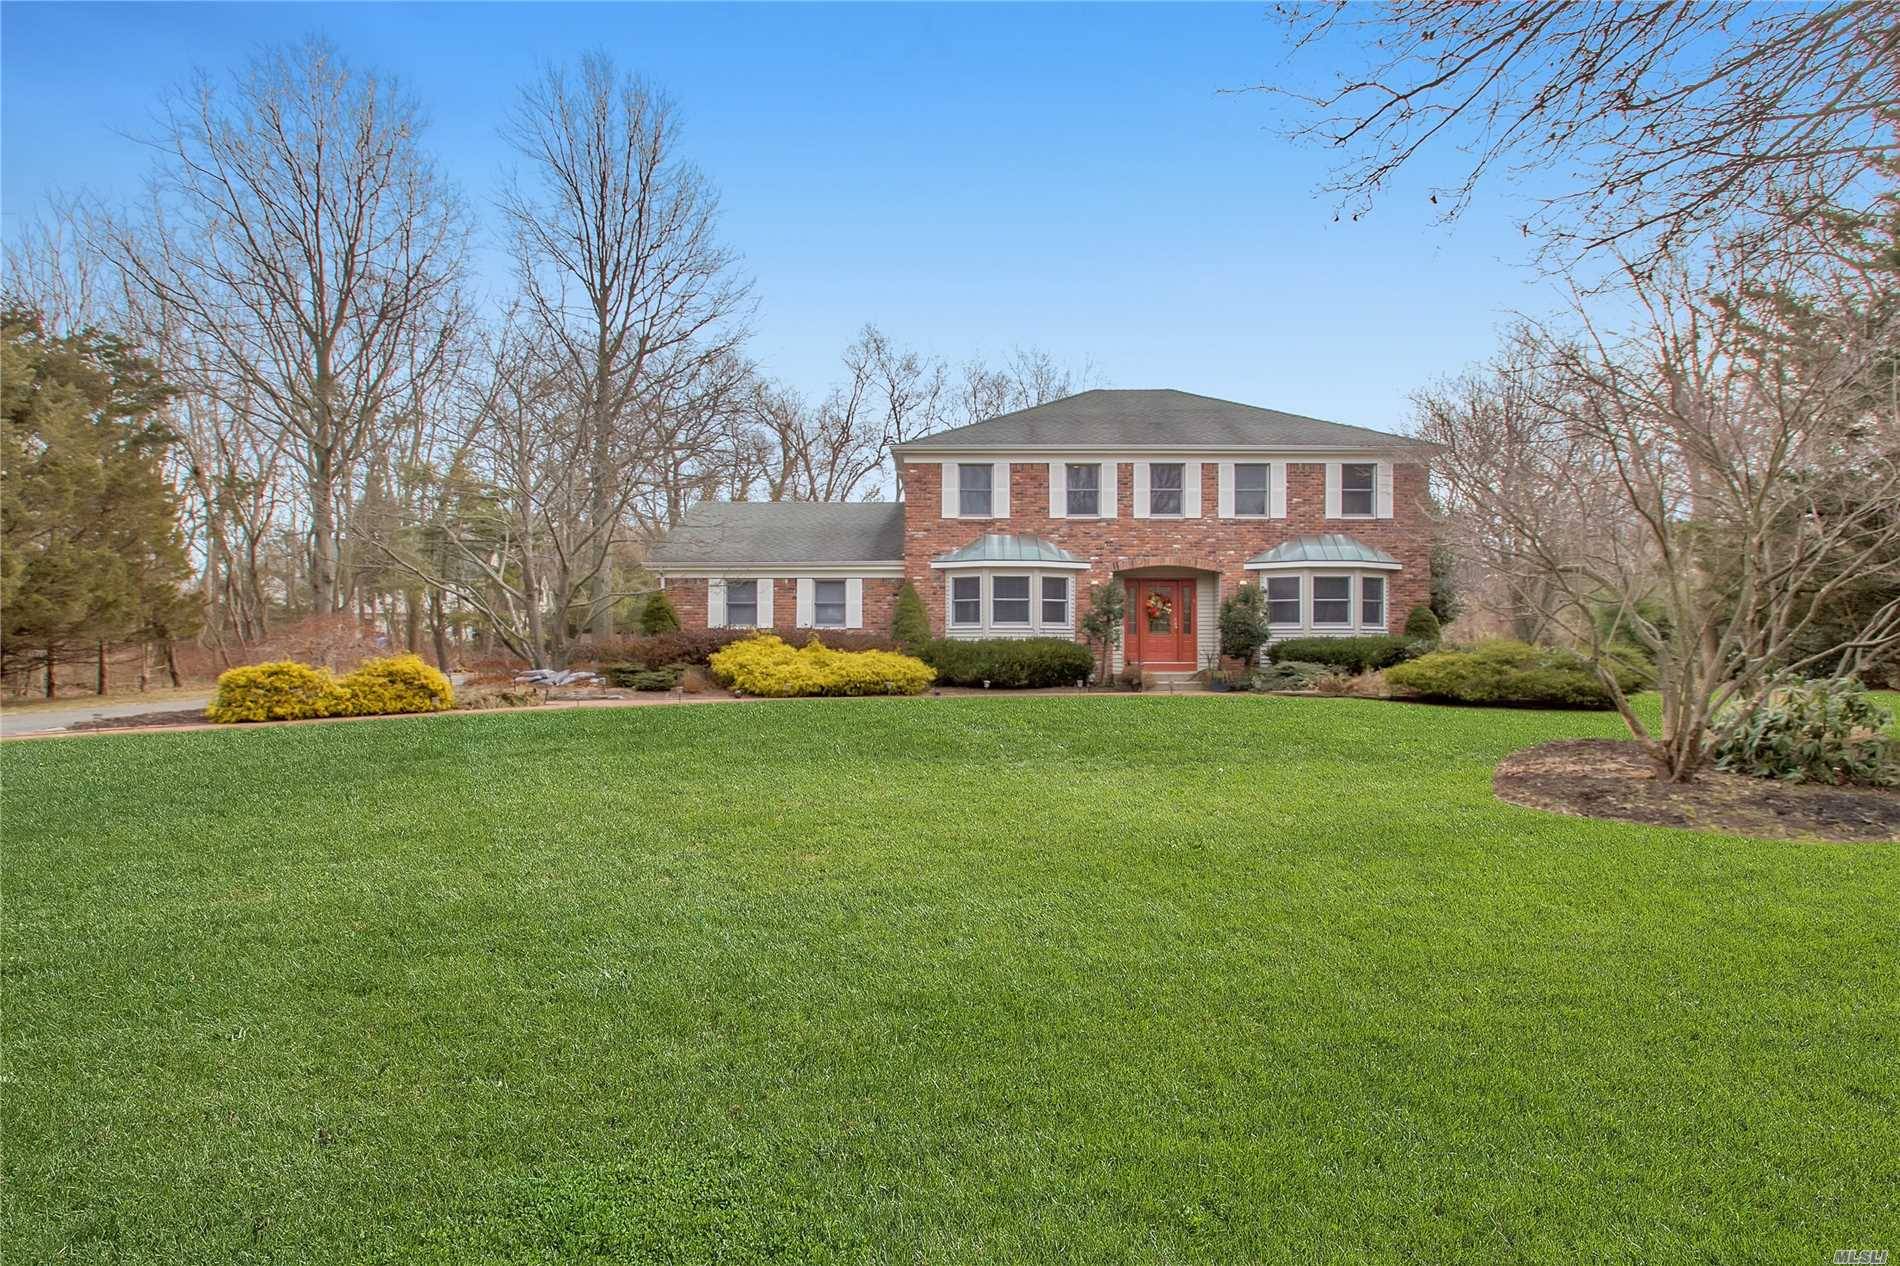 Stately Strong's Neck Brick Colonial On A Private Cul-De-Sac-Generous Size Rooms-Hardwood And Porcelain Floors-Kitchen With Granite Counter Tops/S.